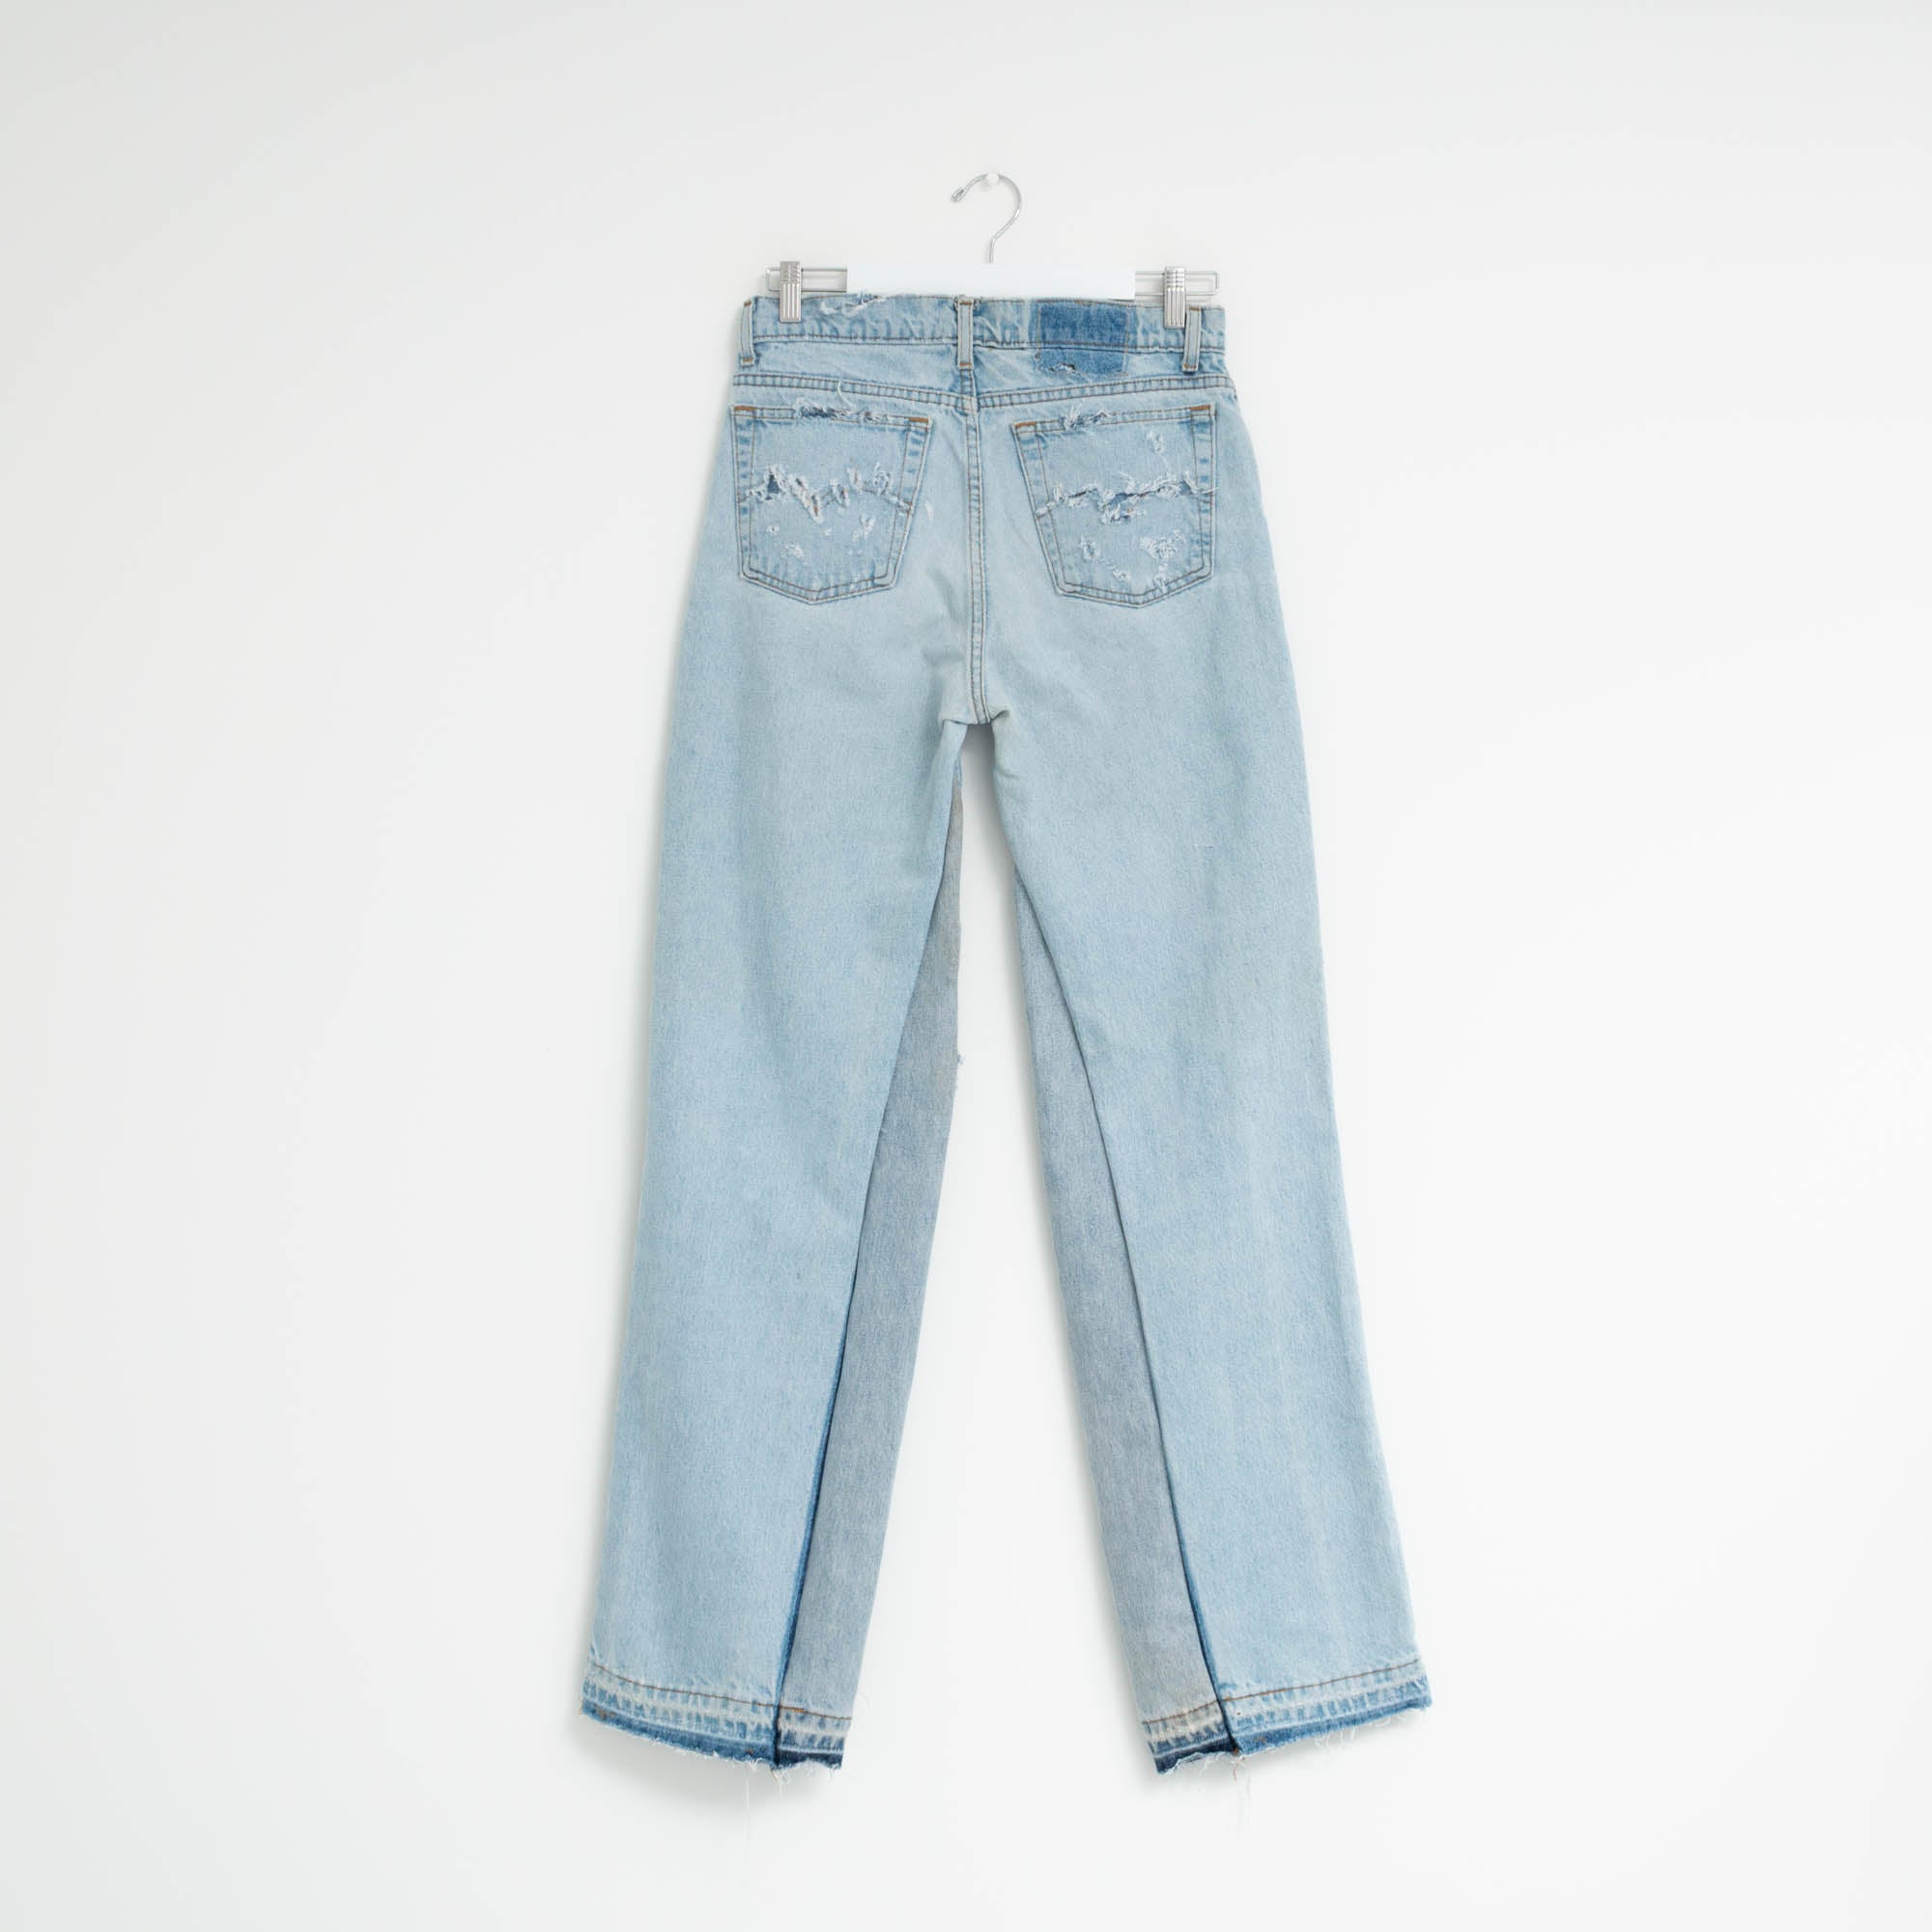 "FLARE" Jeans W31 L35